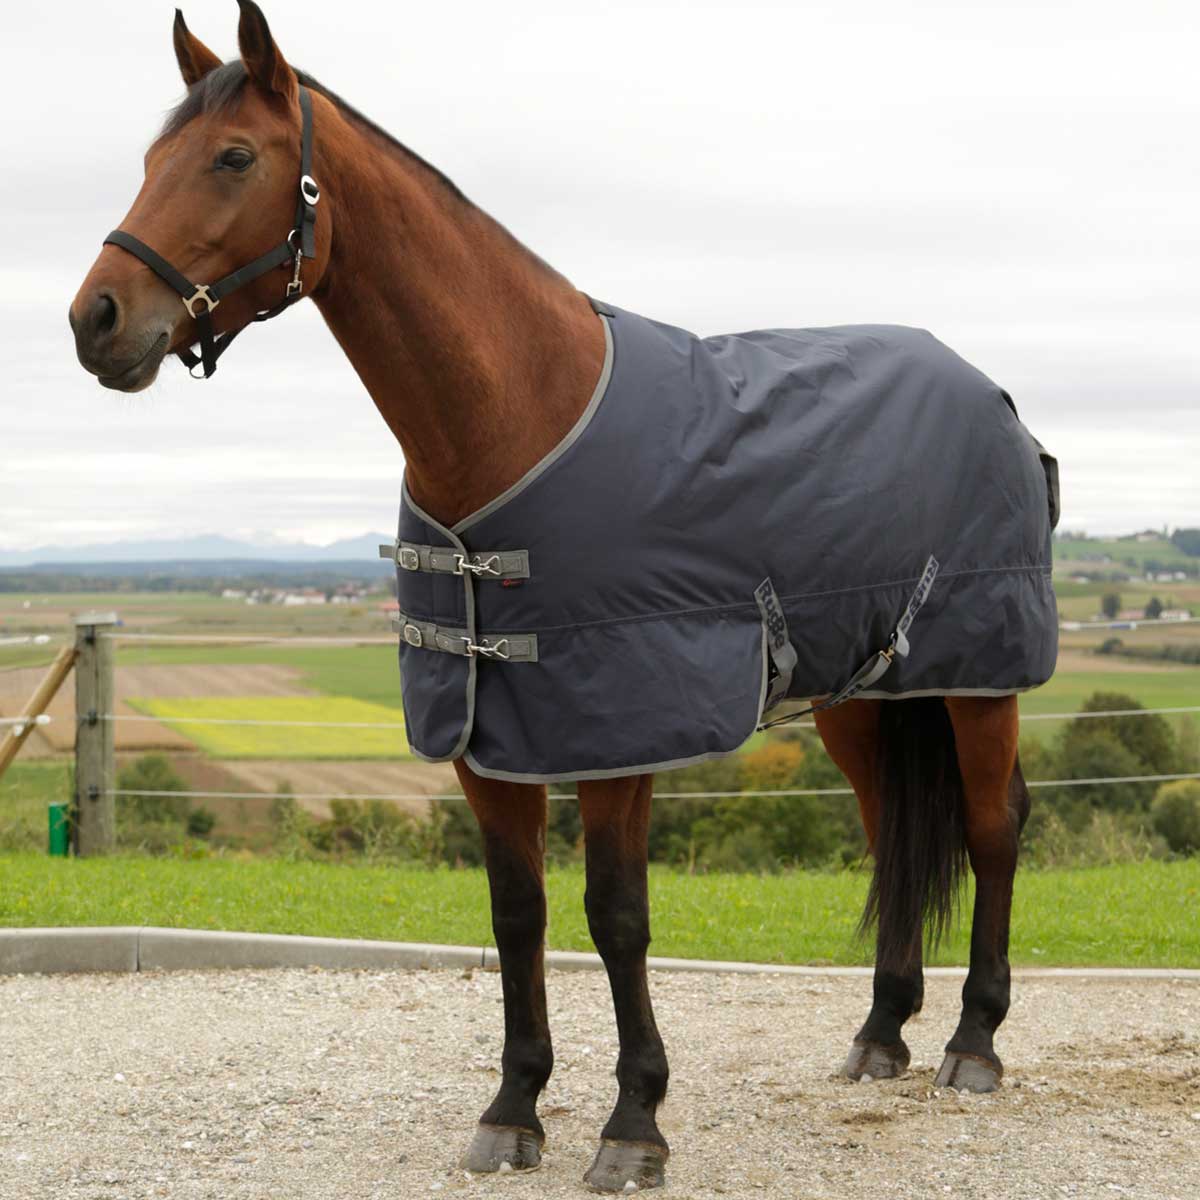 Covalliero Winter Blanket RugBe IceProtect navy 600D, 300g 125